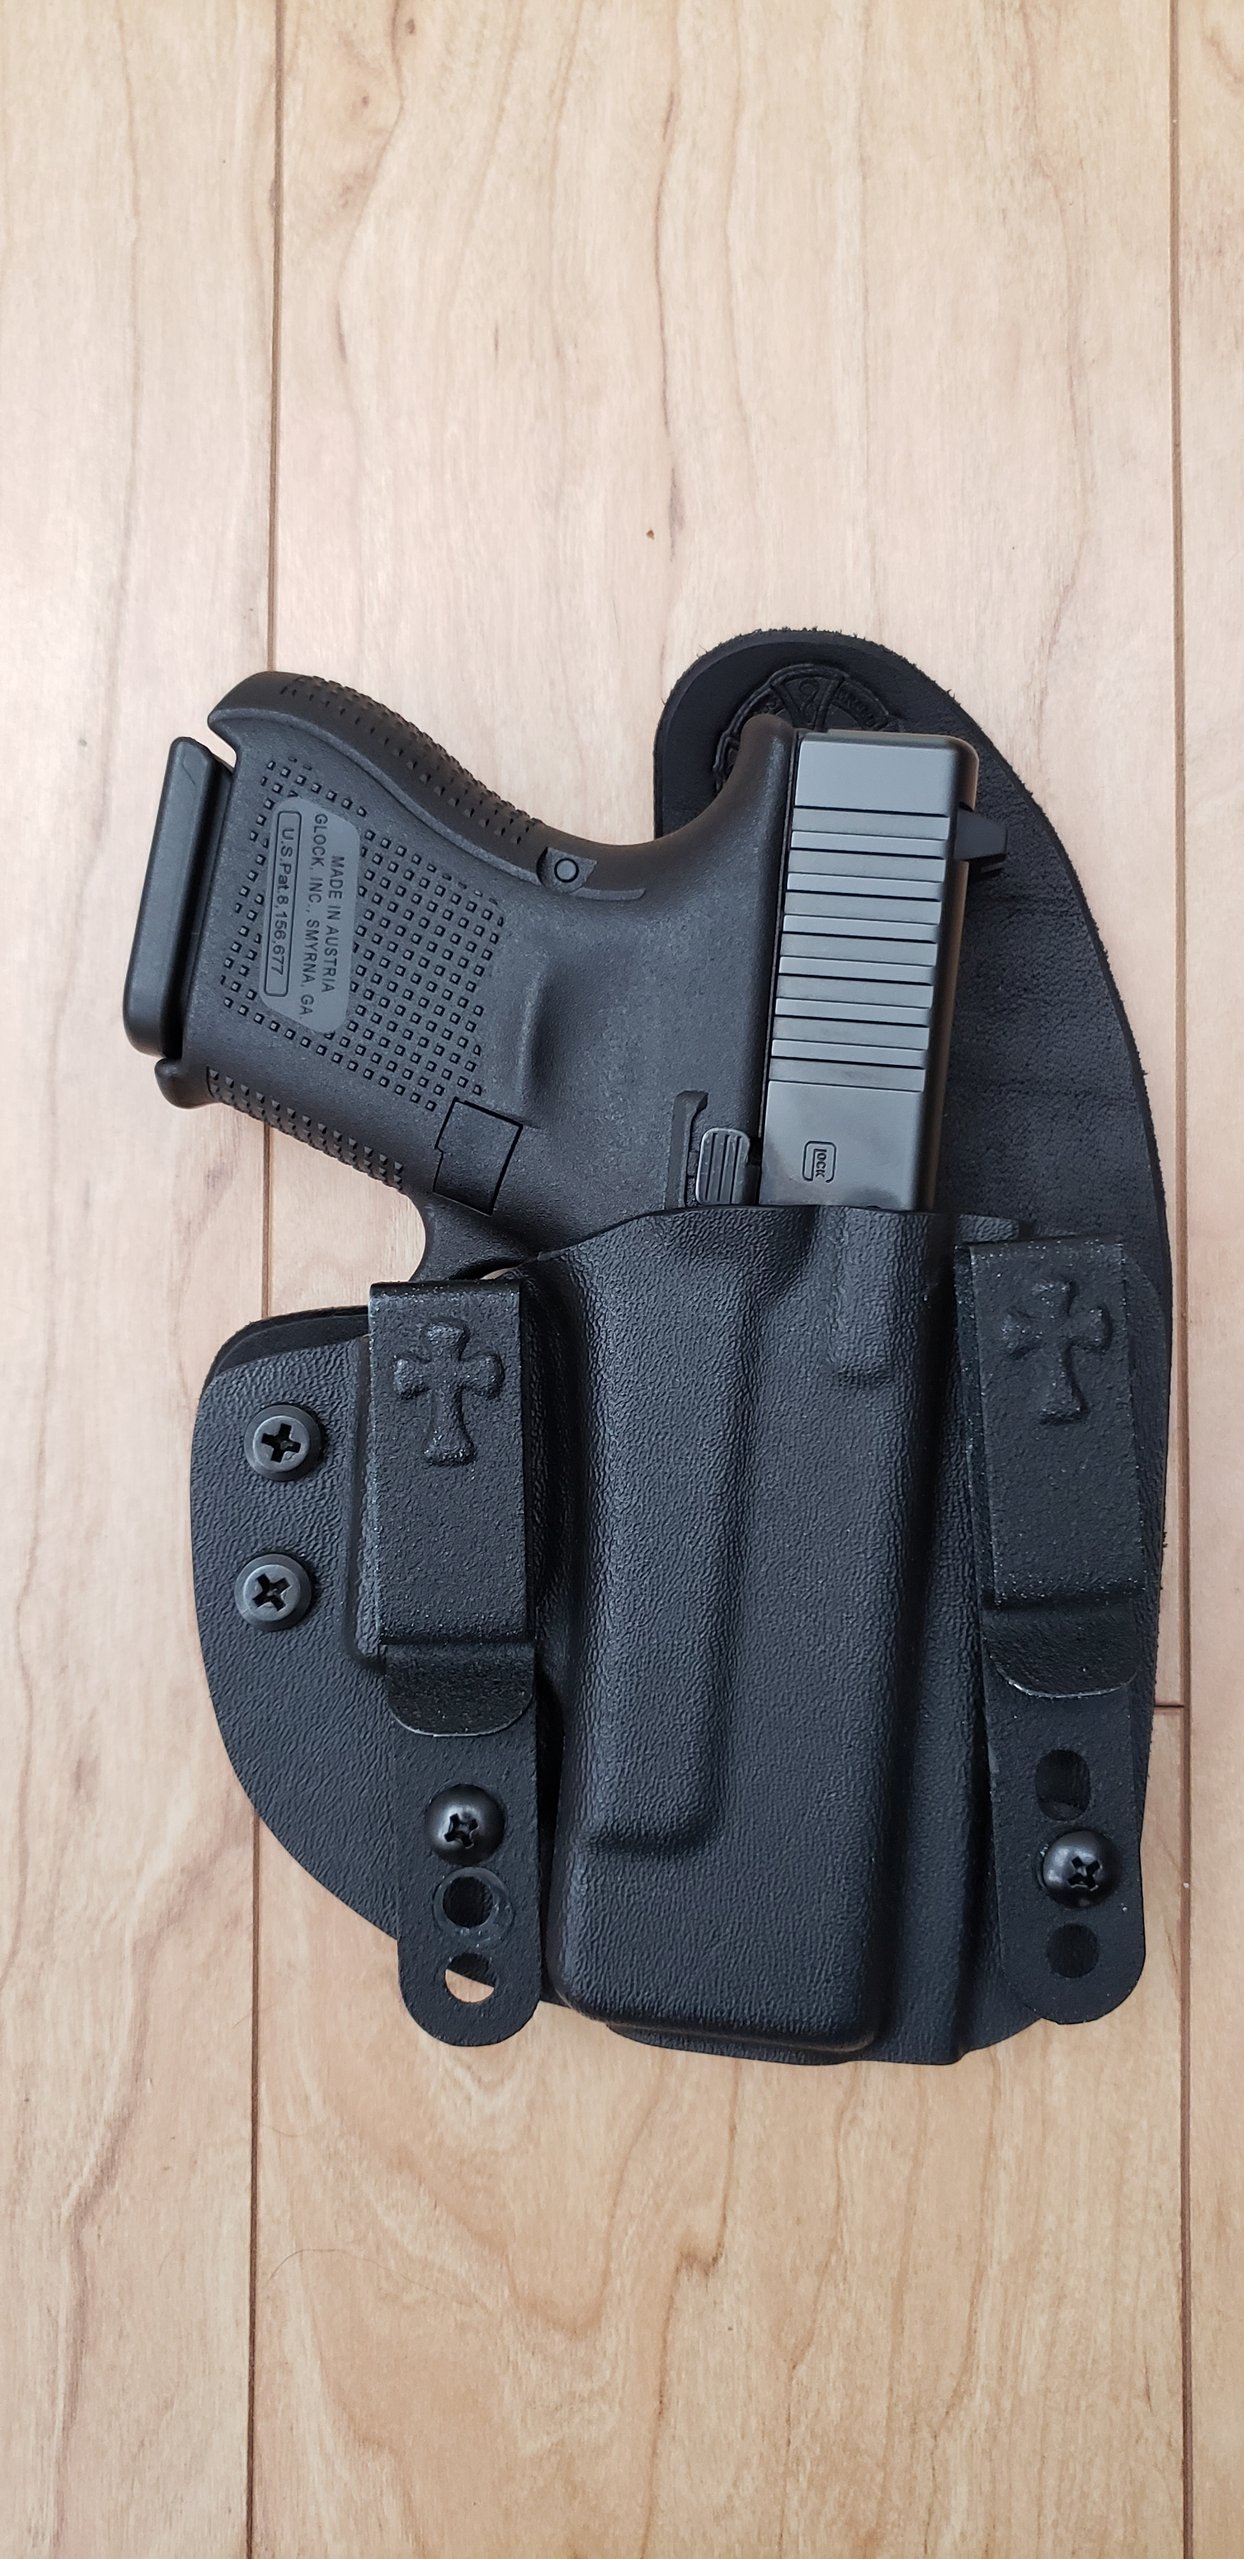 [HOLSTER REVIEW] “The Reckoning” Holster by CrossBreed Holsters